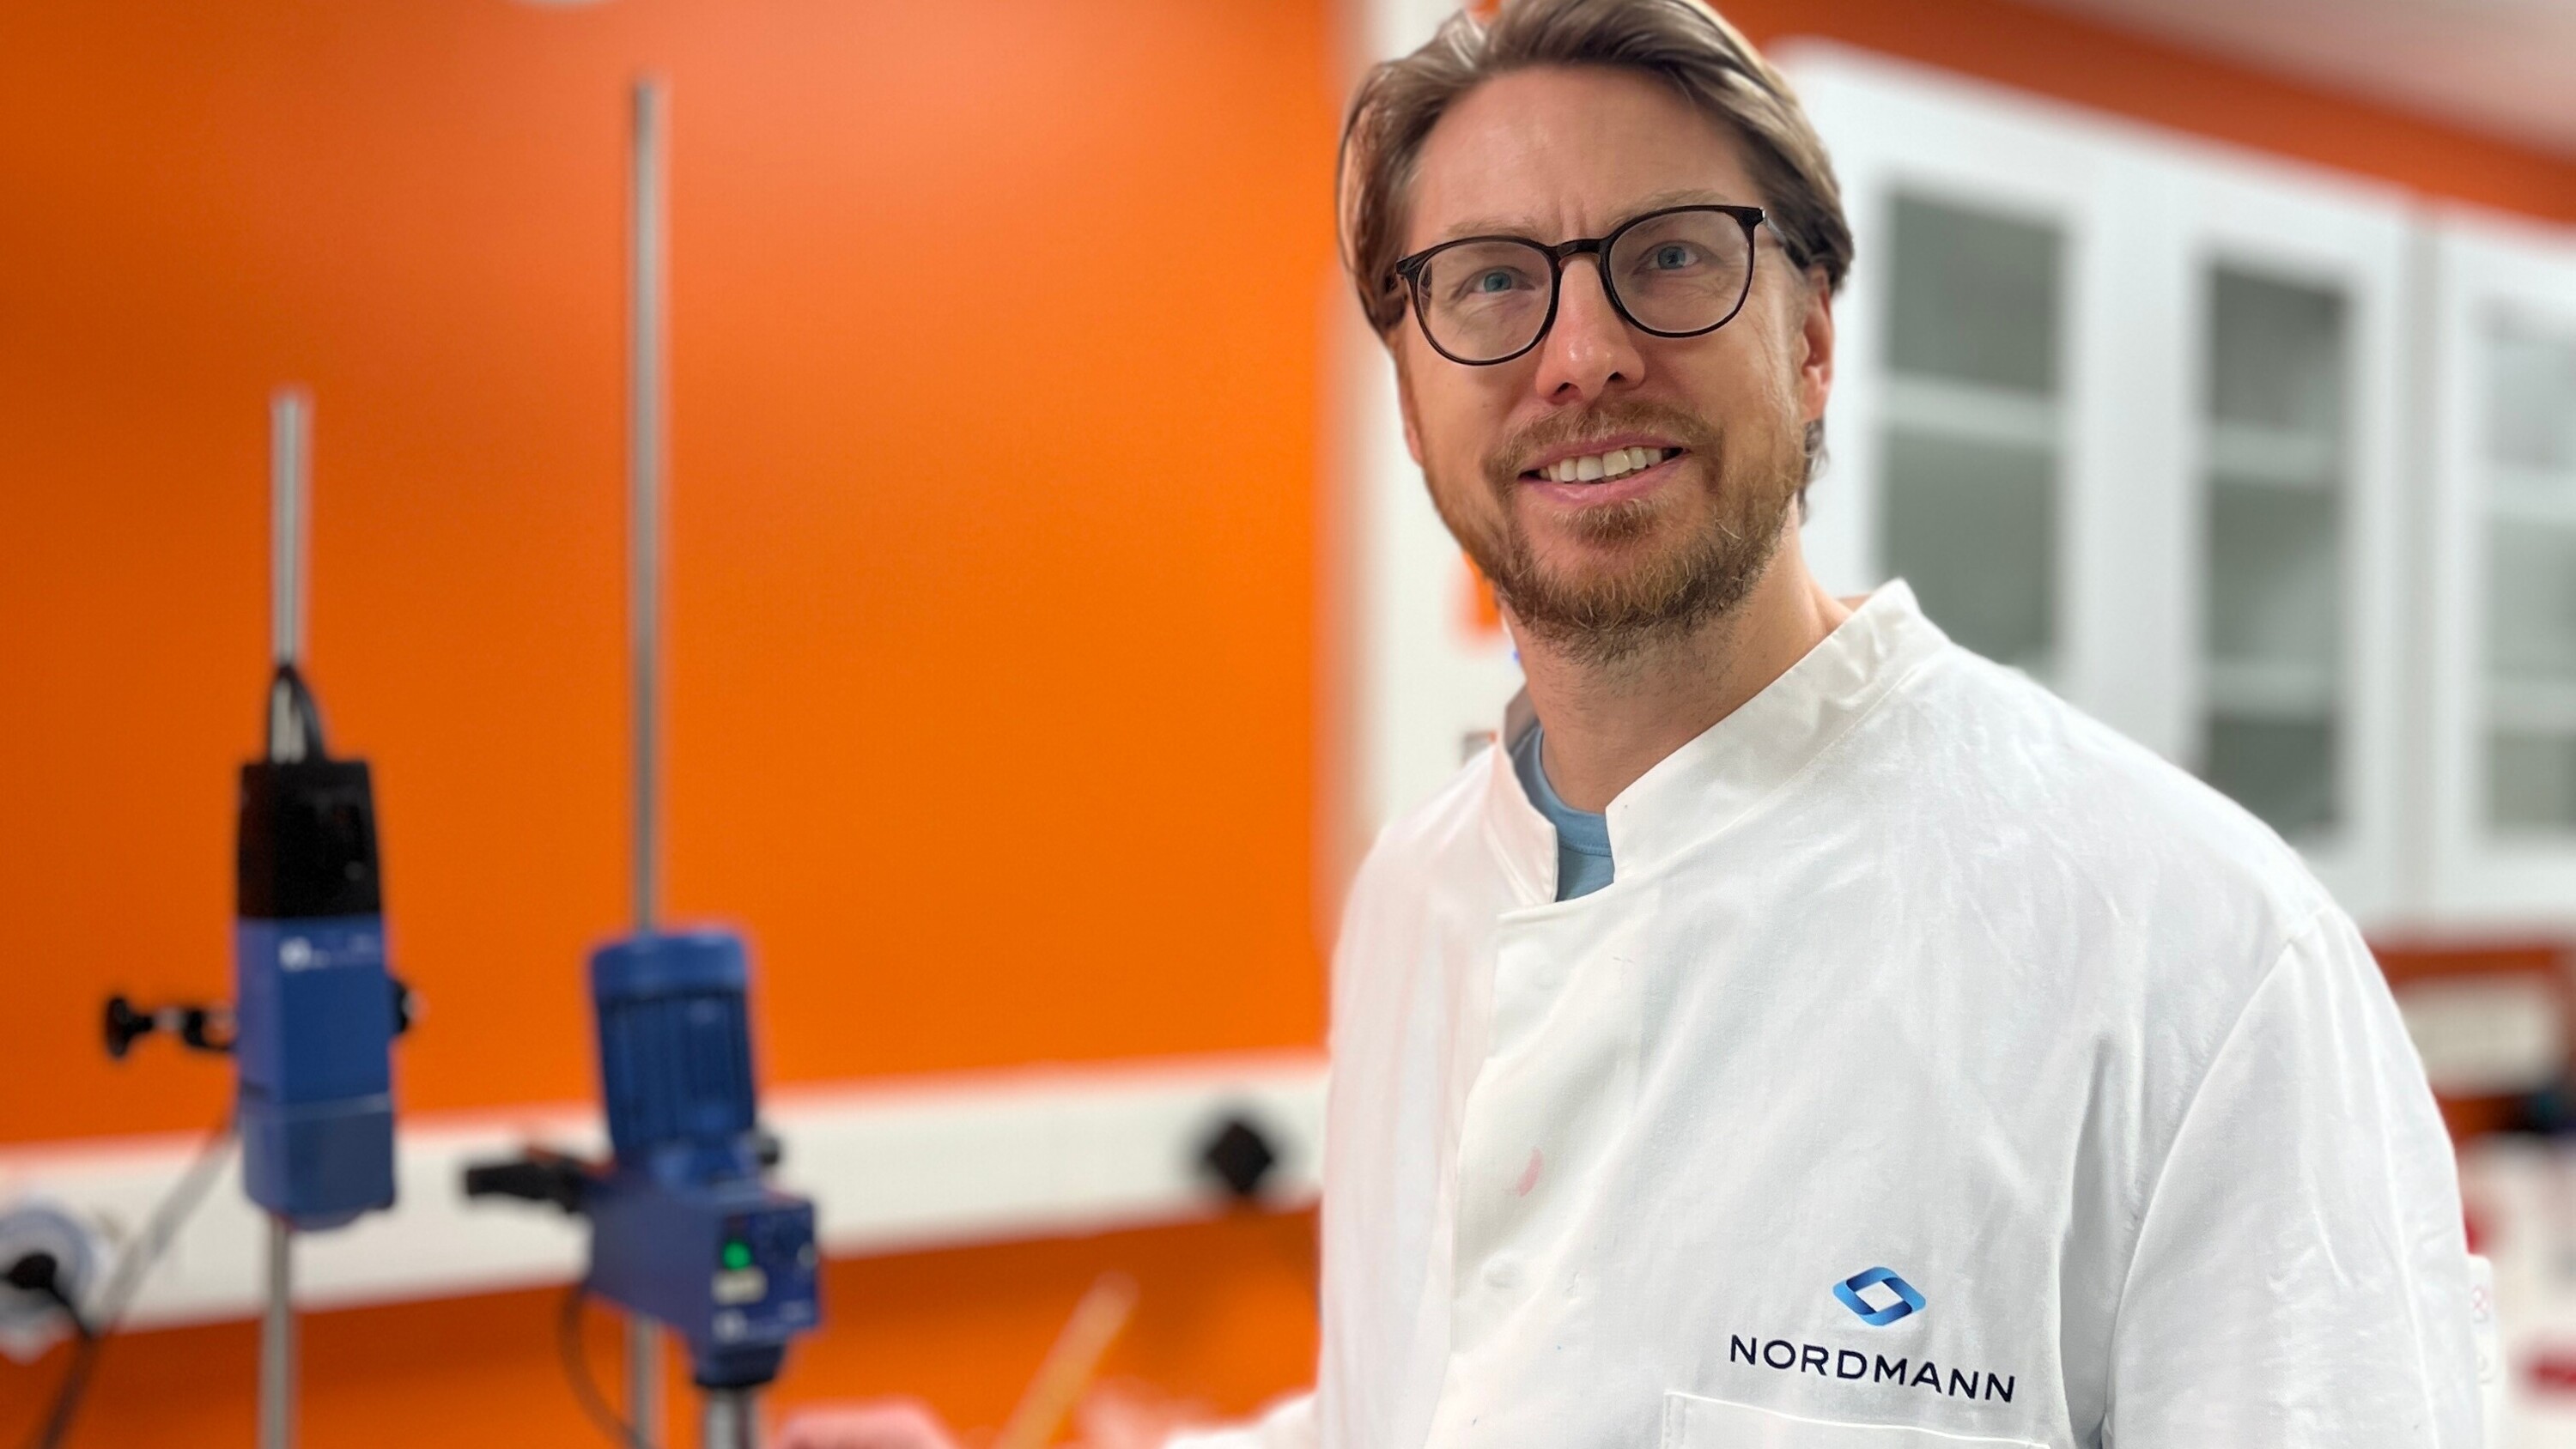 A man, Alf Jarmeus, Senior Application Specialist at Nordmann, standing in a lab with a orange background